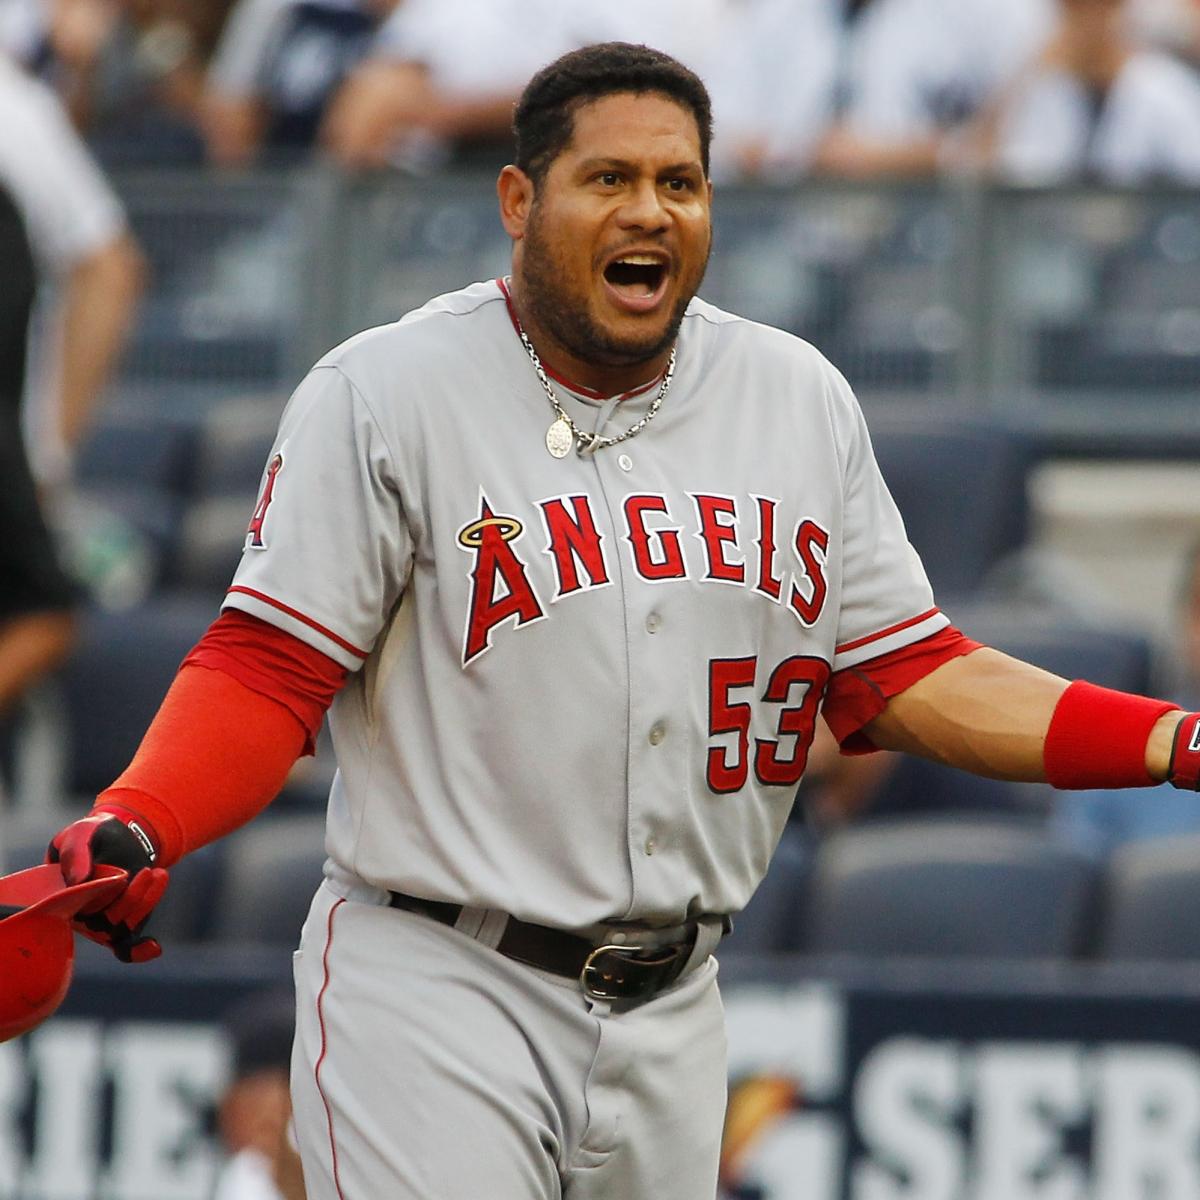 Patient with power: Remember when the Yanks got Bobby Abreu